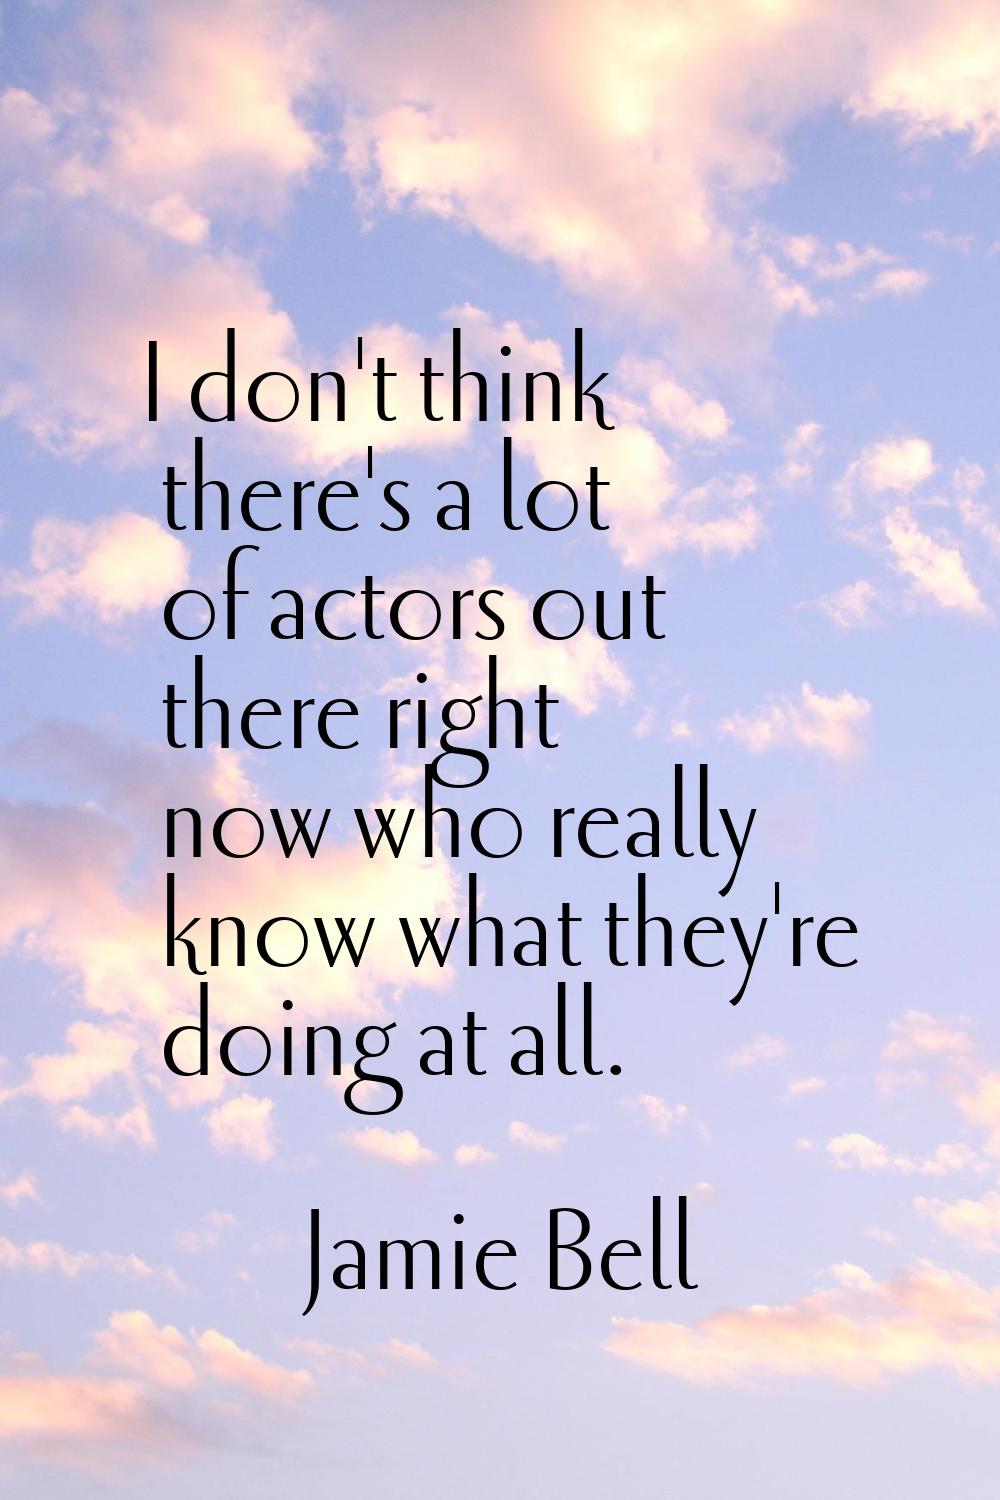 I don't think there's a lot of actors out there right now who really know what they're doing at all